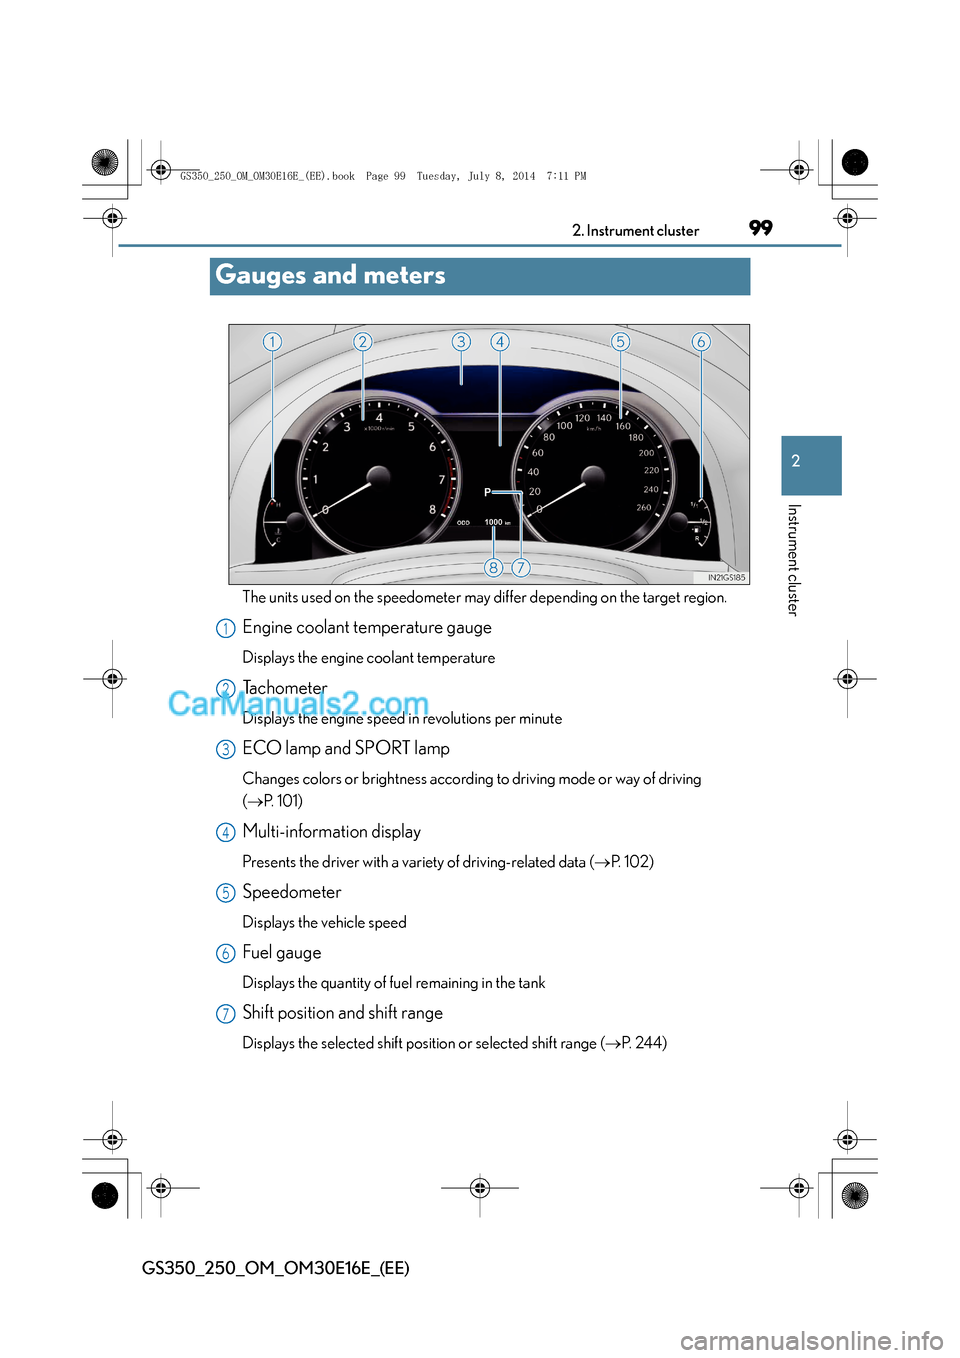 Lexus GS250 2014  Owners Manual 99
2
2. Instrument cluster
Instrument cluster
GS350_250_OM_OM30E16E_(EE)
Gauges and meters
The units used on the speedometer may differ depending on the target region.
Engine coolant temperature gauge